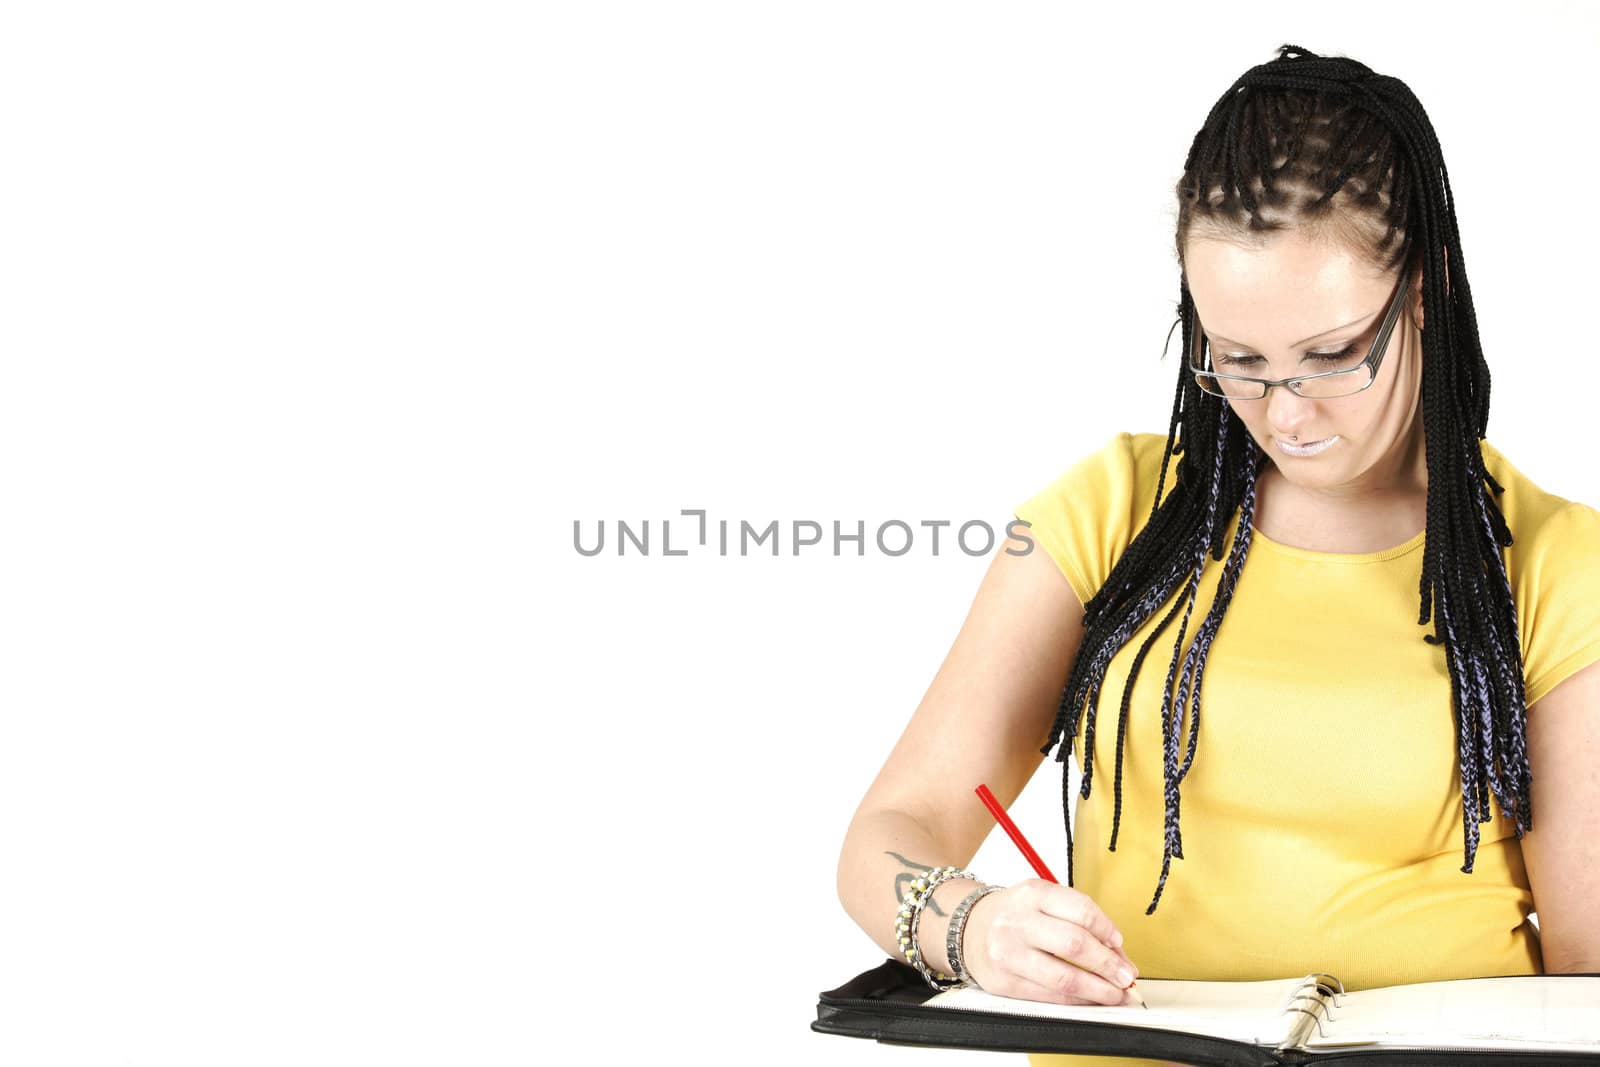 Manageress with braids and tattoos